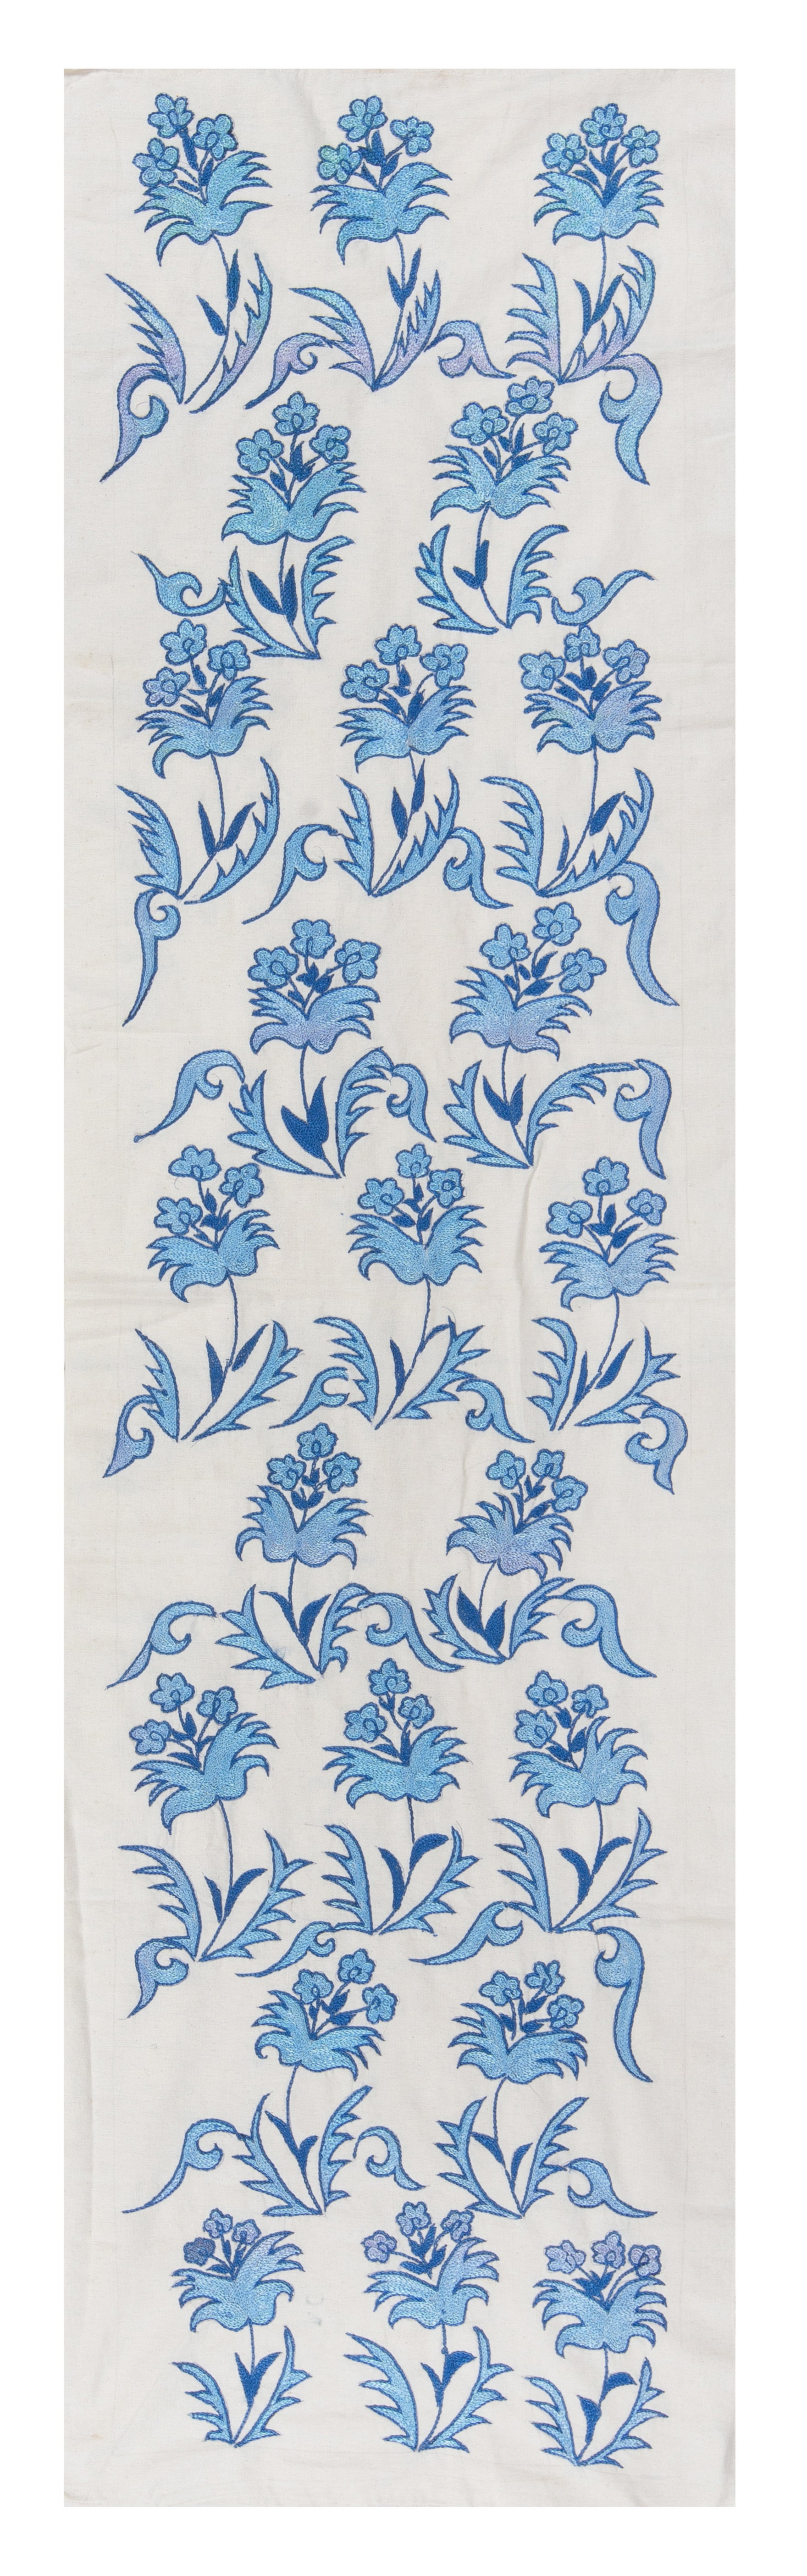 1.7x6.3 Ft Floral Suzani Table Runner, Embroidered Wall Hanging, Blue Tapestry